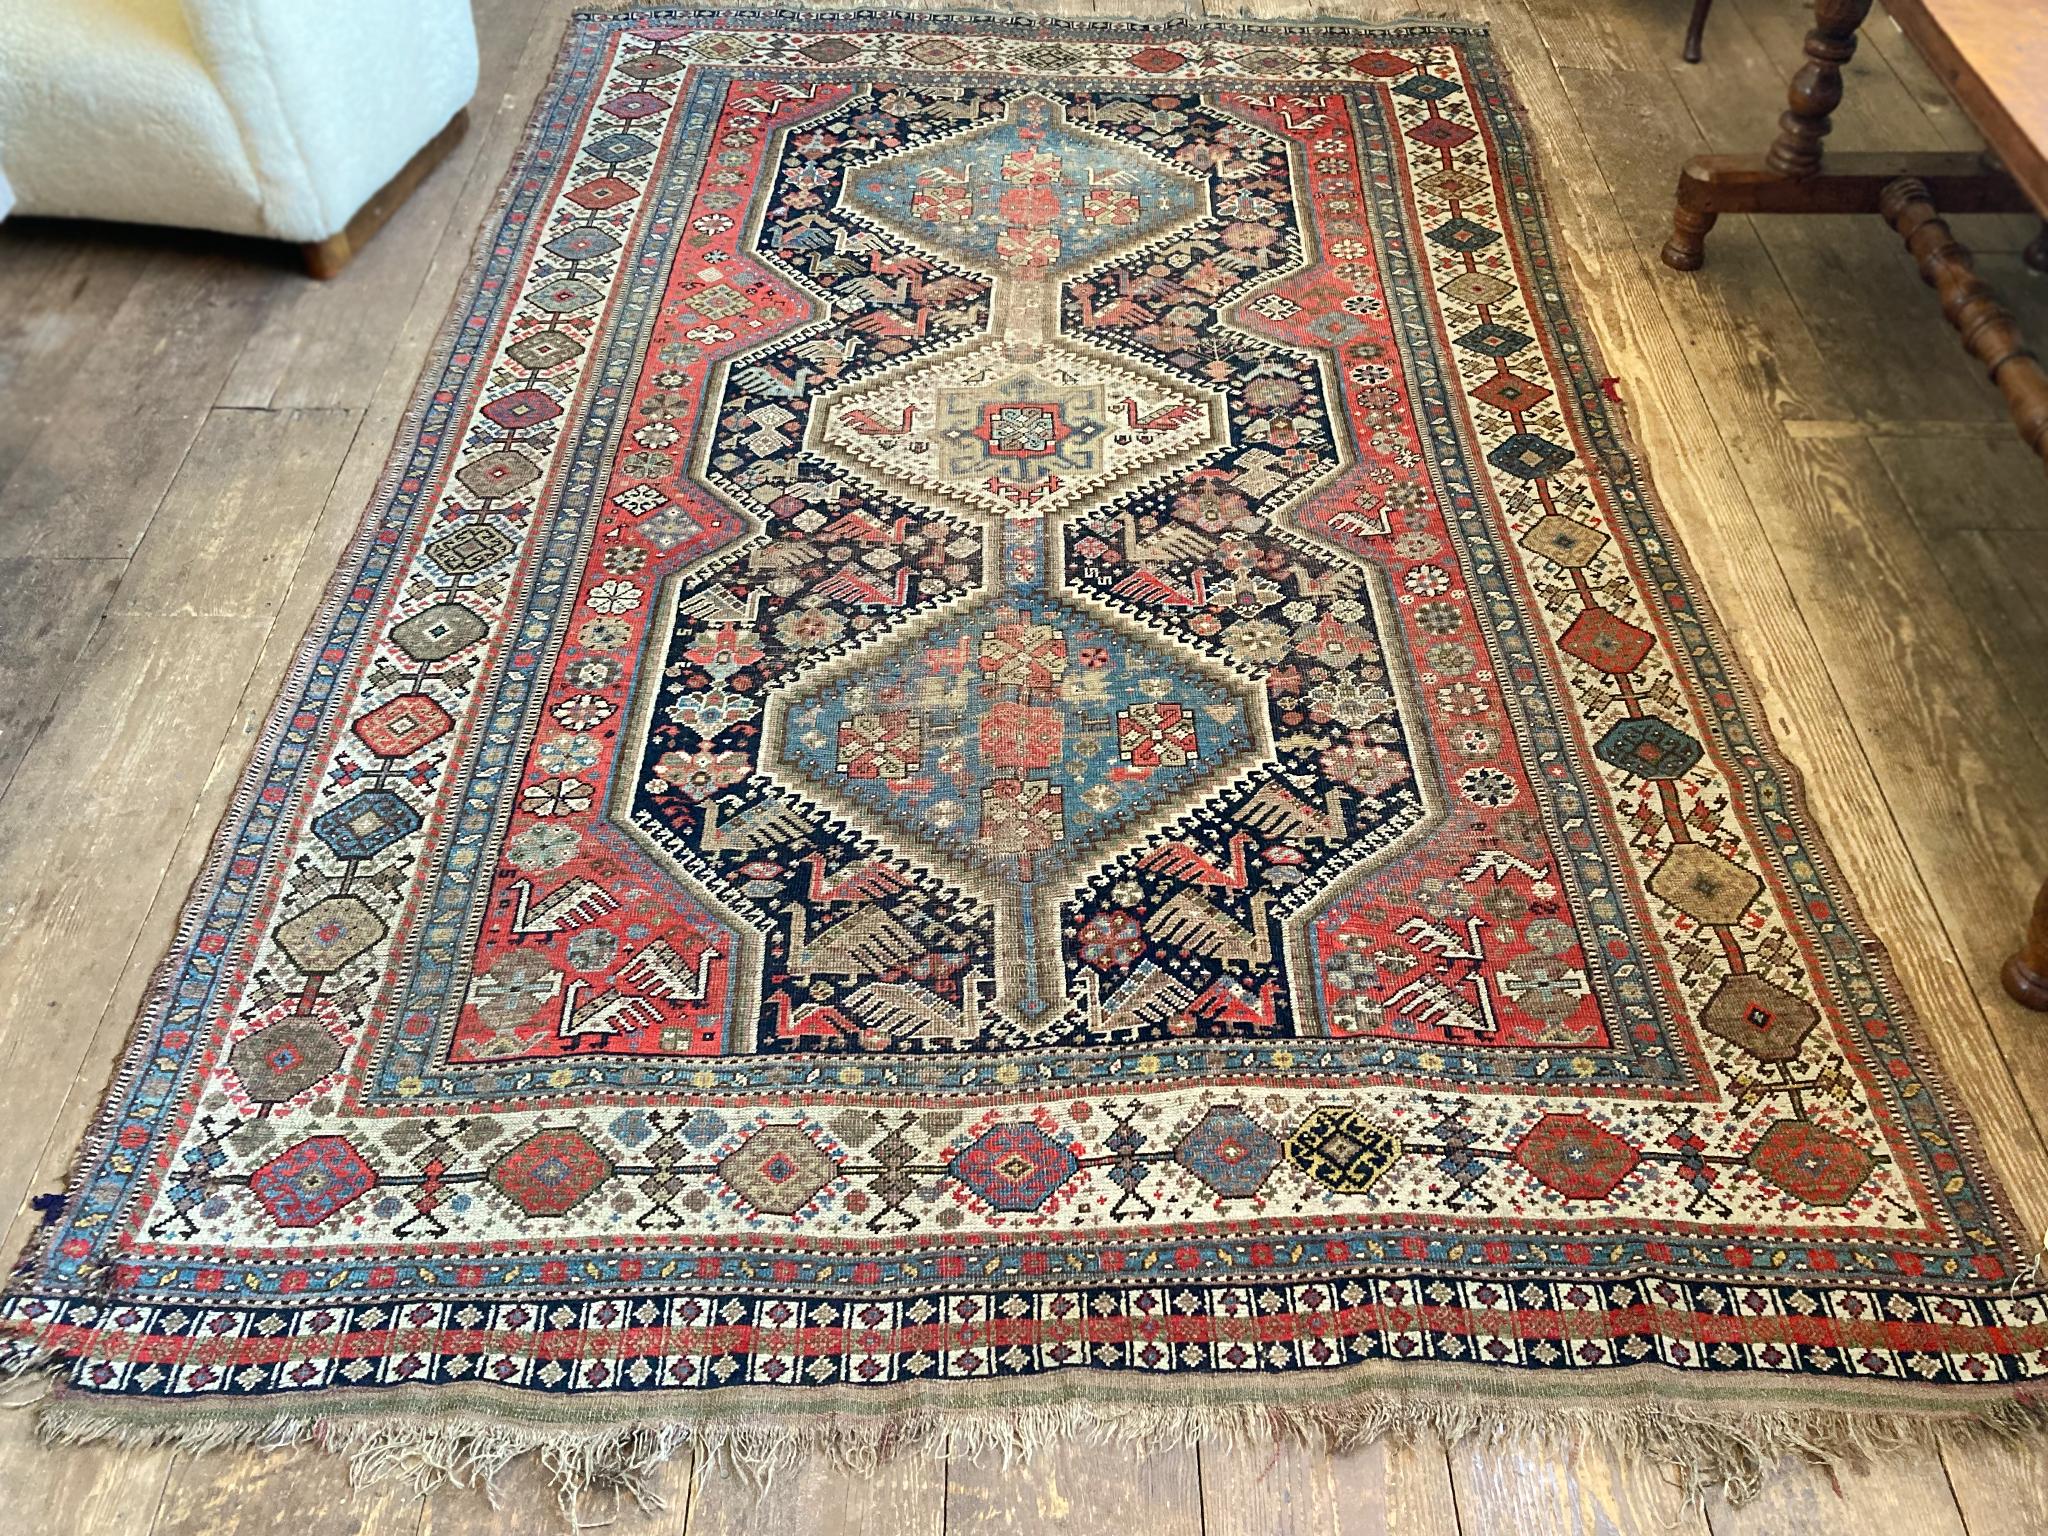 Shiraz rug hand-woven in the first quarter of the 20th Century. The design features three central medallions surrounded by flowers and peacocks and a series of borders with geometric patterns, all in a rich palette of blue, yellow, red, and ivory